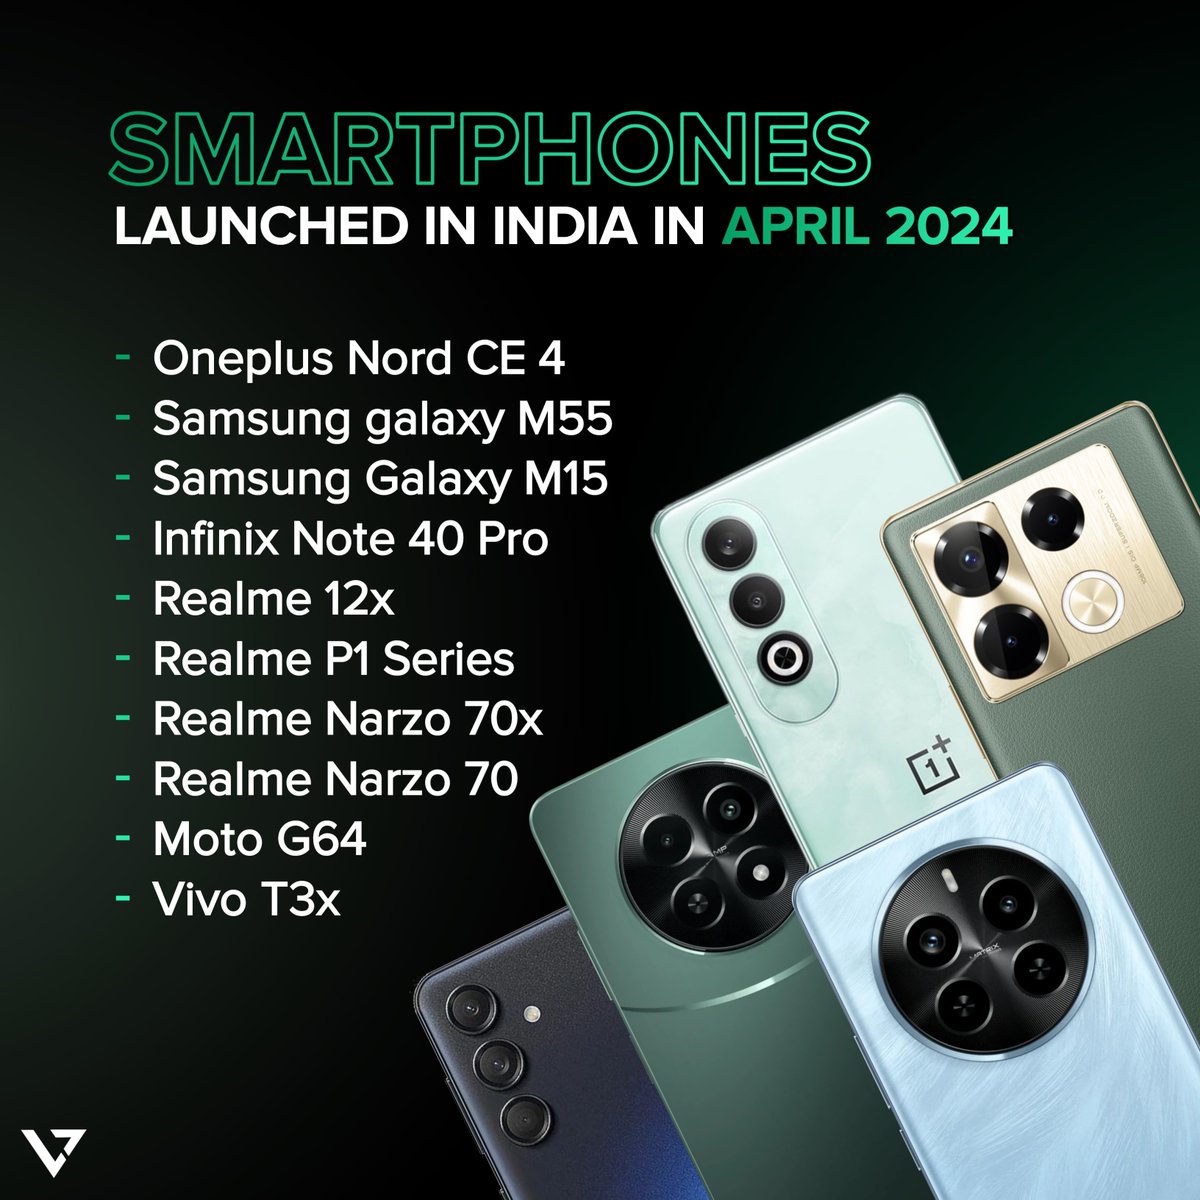 Check out the phones launched in April!

Which phone is not in the listed?
.
.
#techyvillage #smartphone #phone #launchedsmartohones #phones #oneplusnord4 #samsunggalaxym55 #realmep1series #samsunggalaxym15 #realmenarzo70 #motog64 #vivot3x #realmenarzo70x